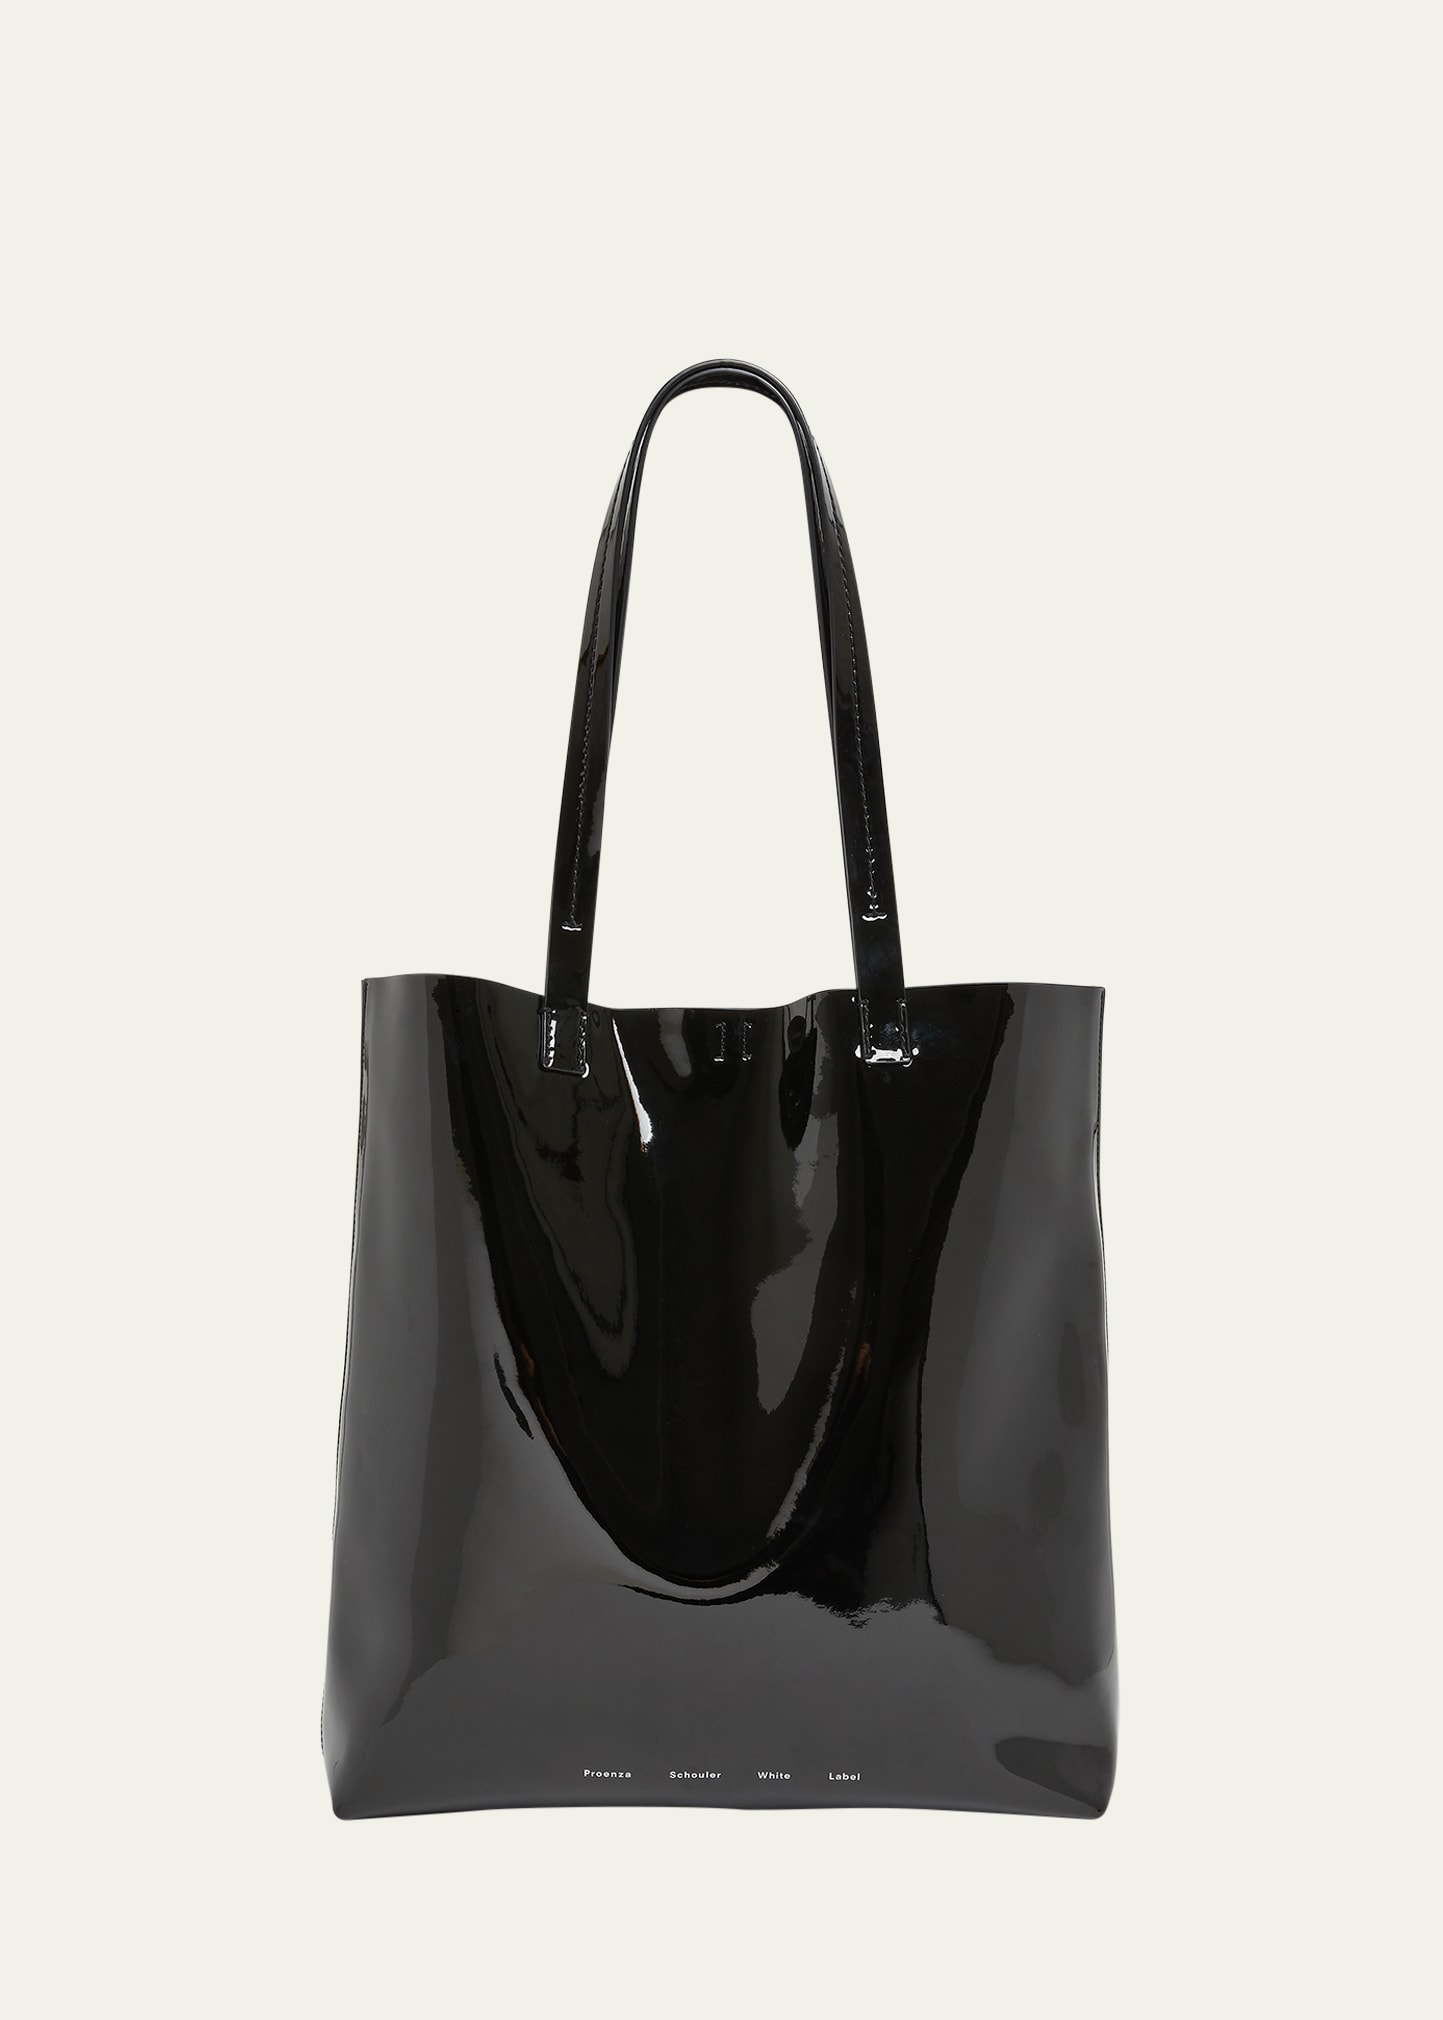 PROENZA SCHOULER WHITE LABEL WALKER PATENT LEATHER TOTE BAG